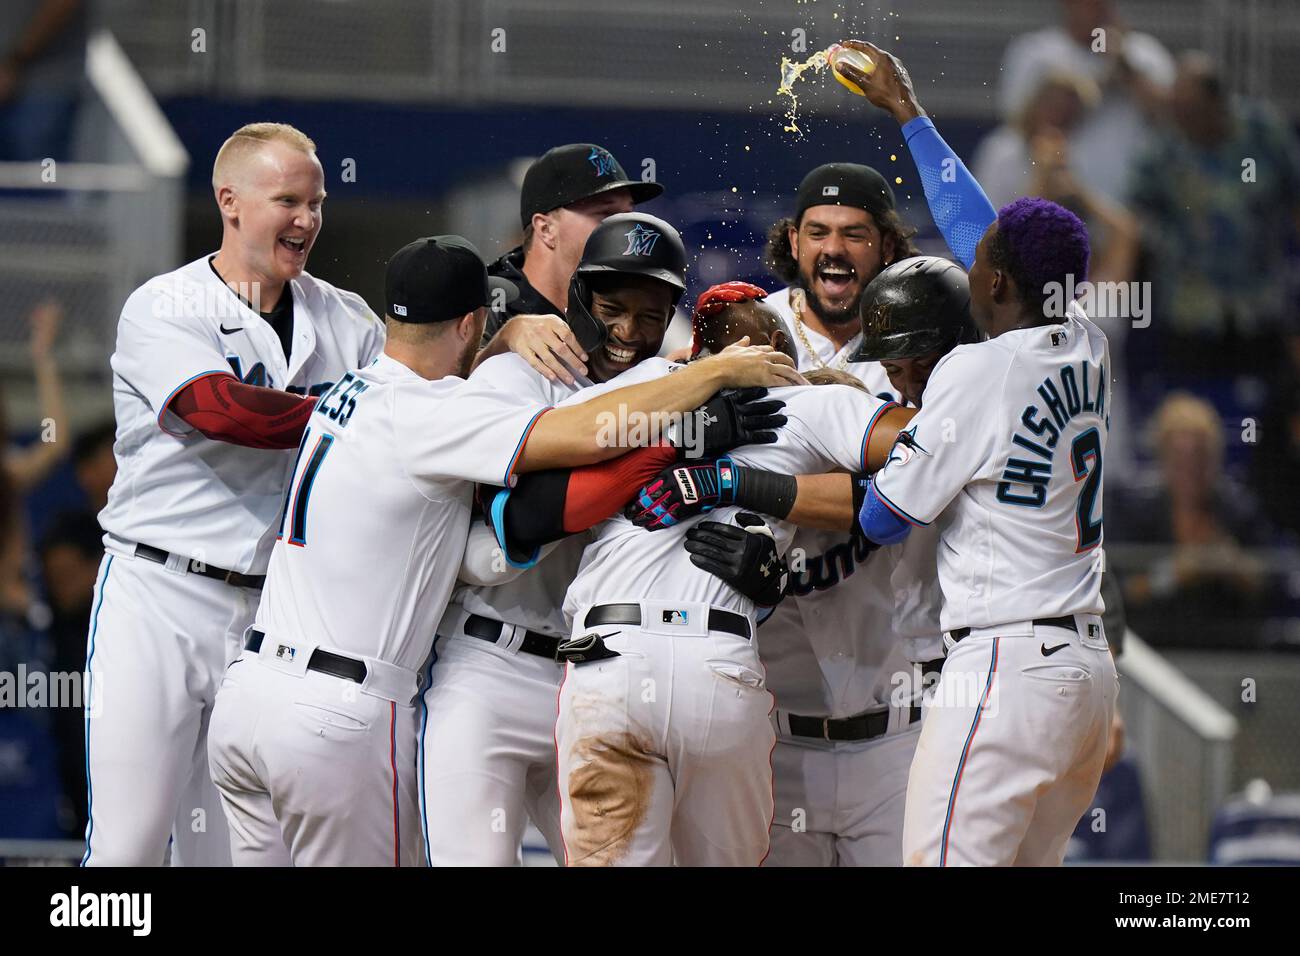 Miami Marlins' Starling Marte, center foreground, is mobbed by